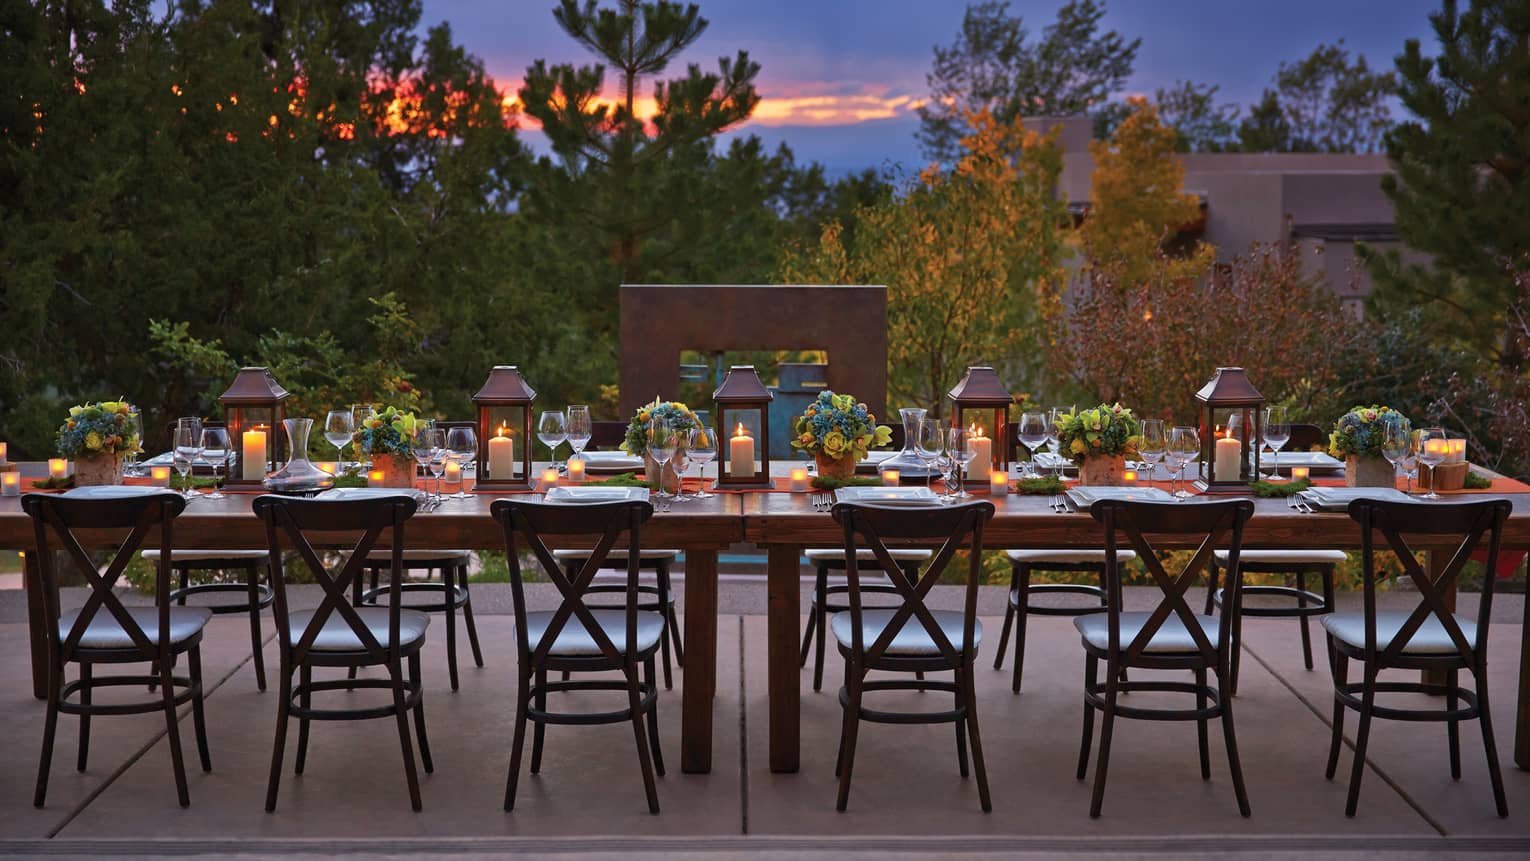 Long, candle-lit dining table on Terra patio at sunset